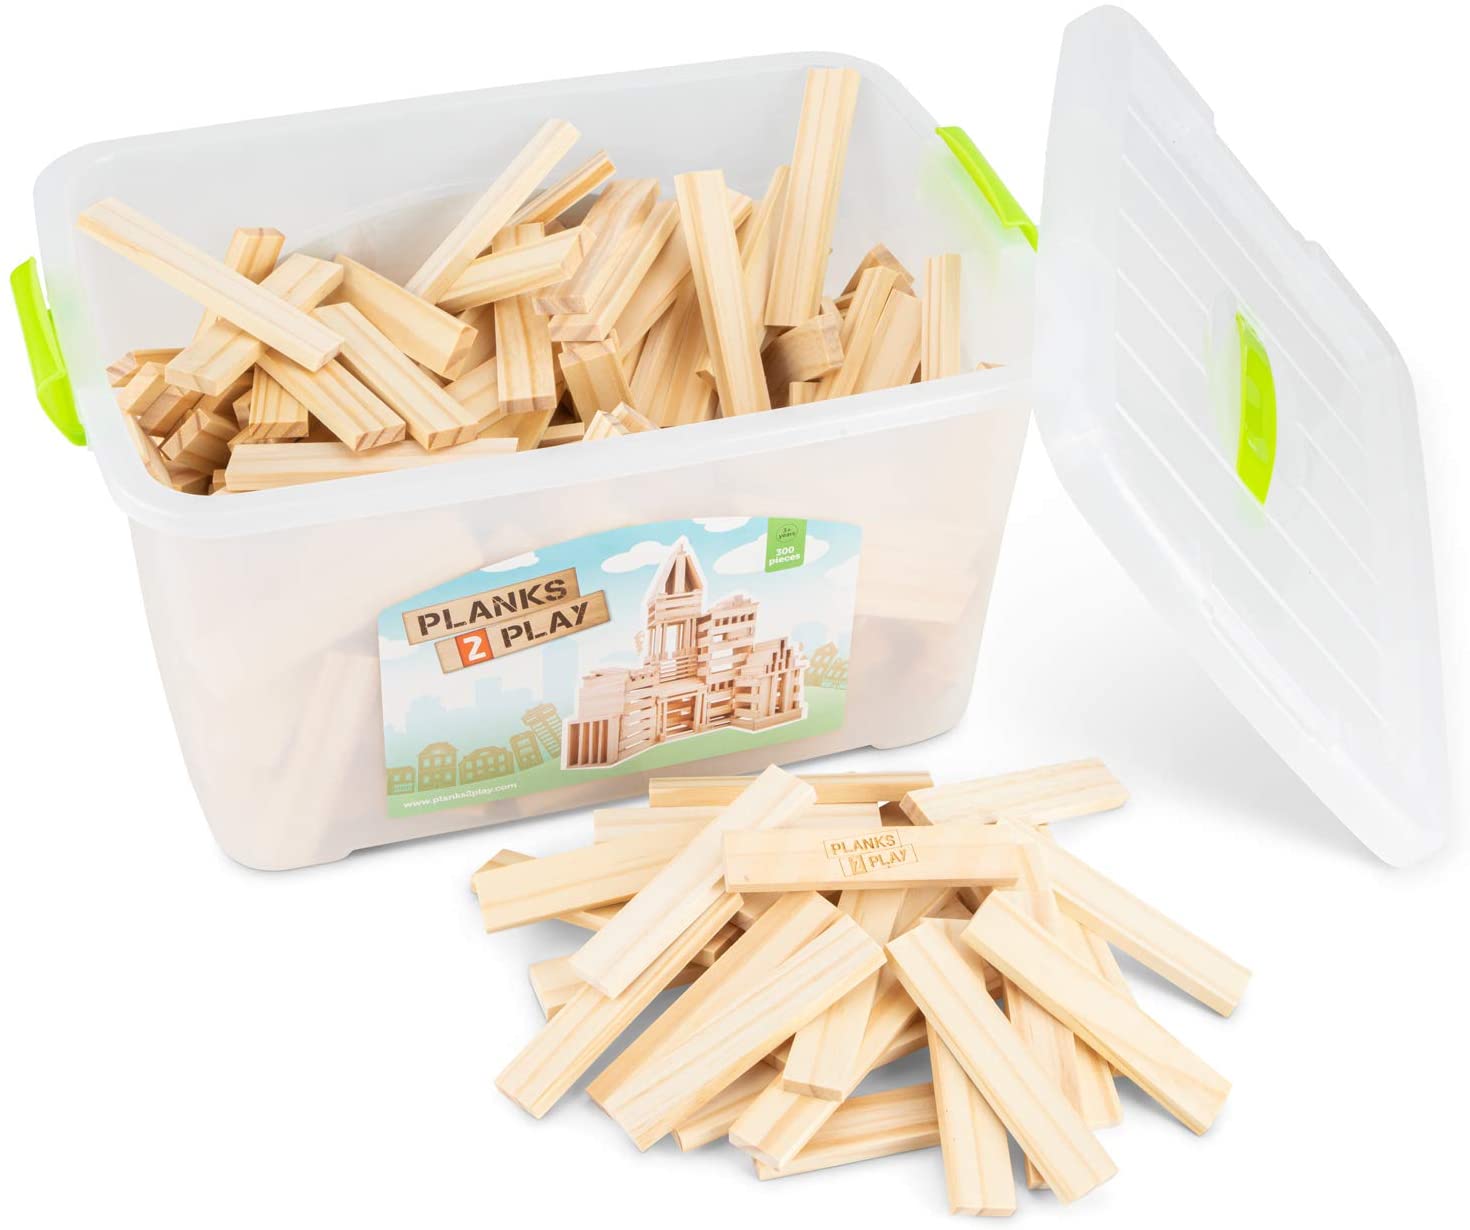 Planks 2 Play - 300 Wooden Boards